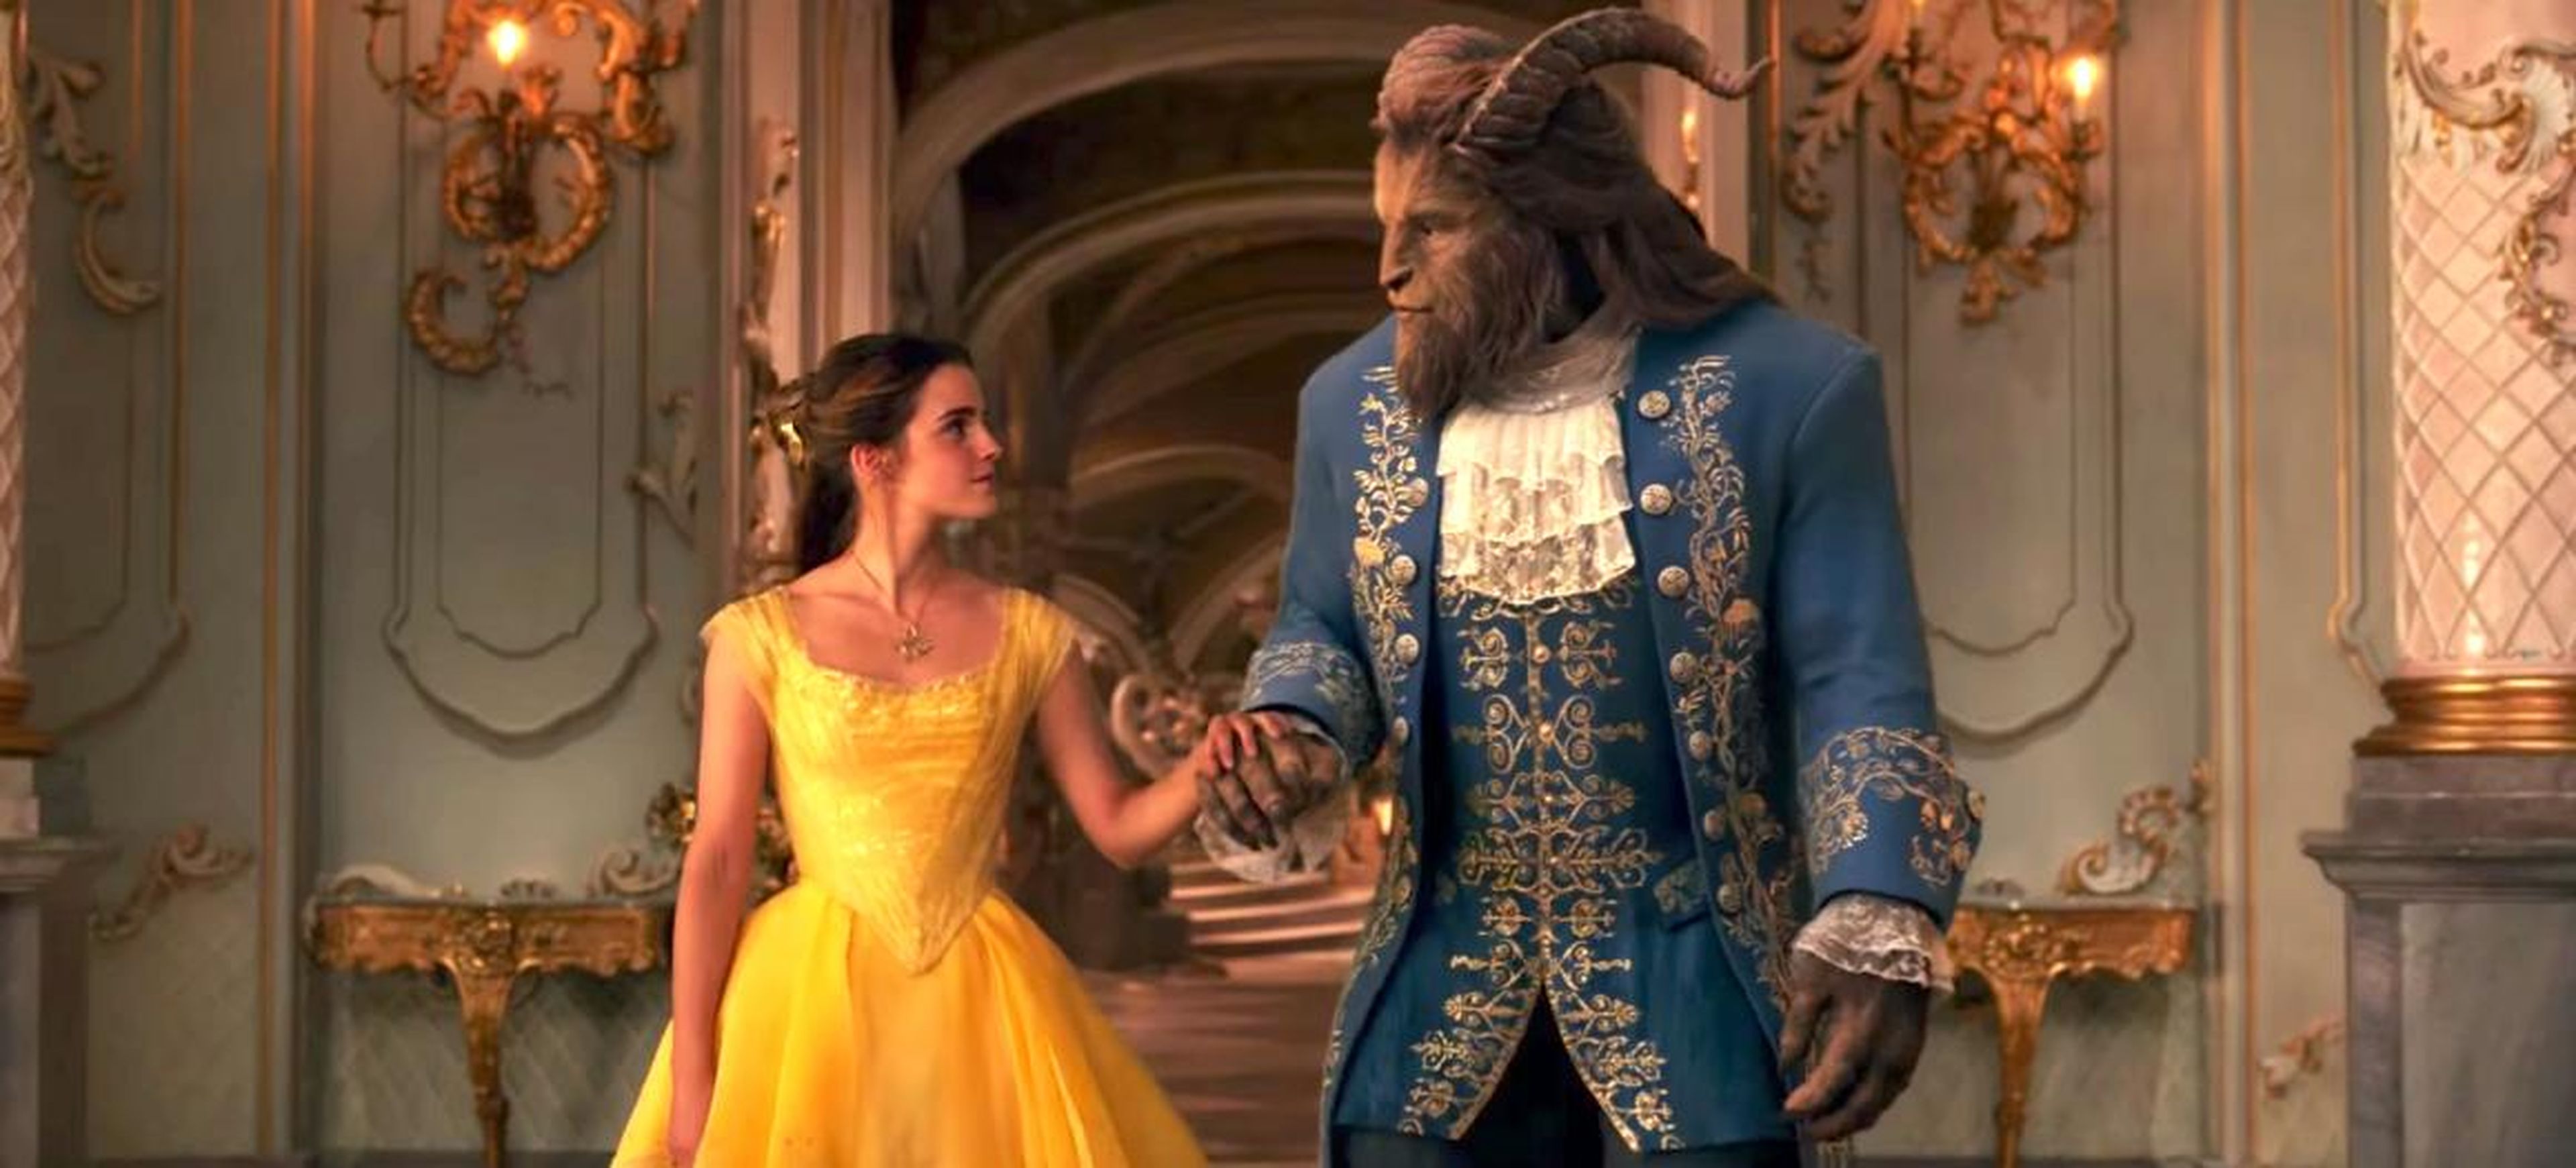 10. "Beauty and the Beast" (2017)